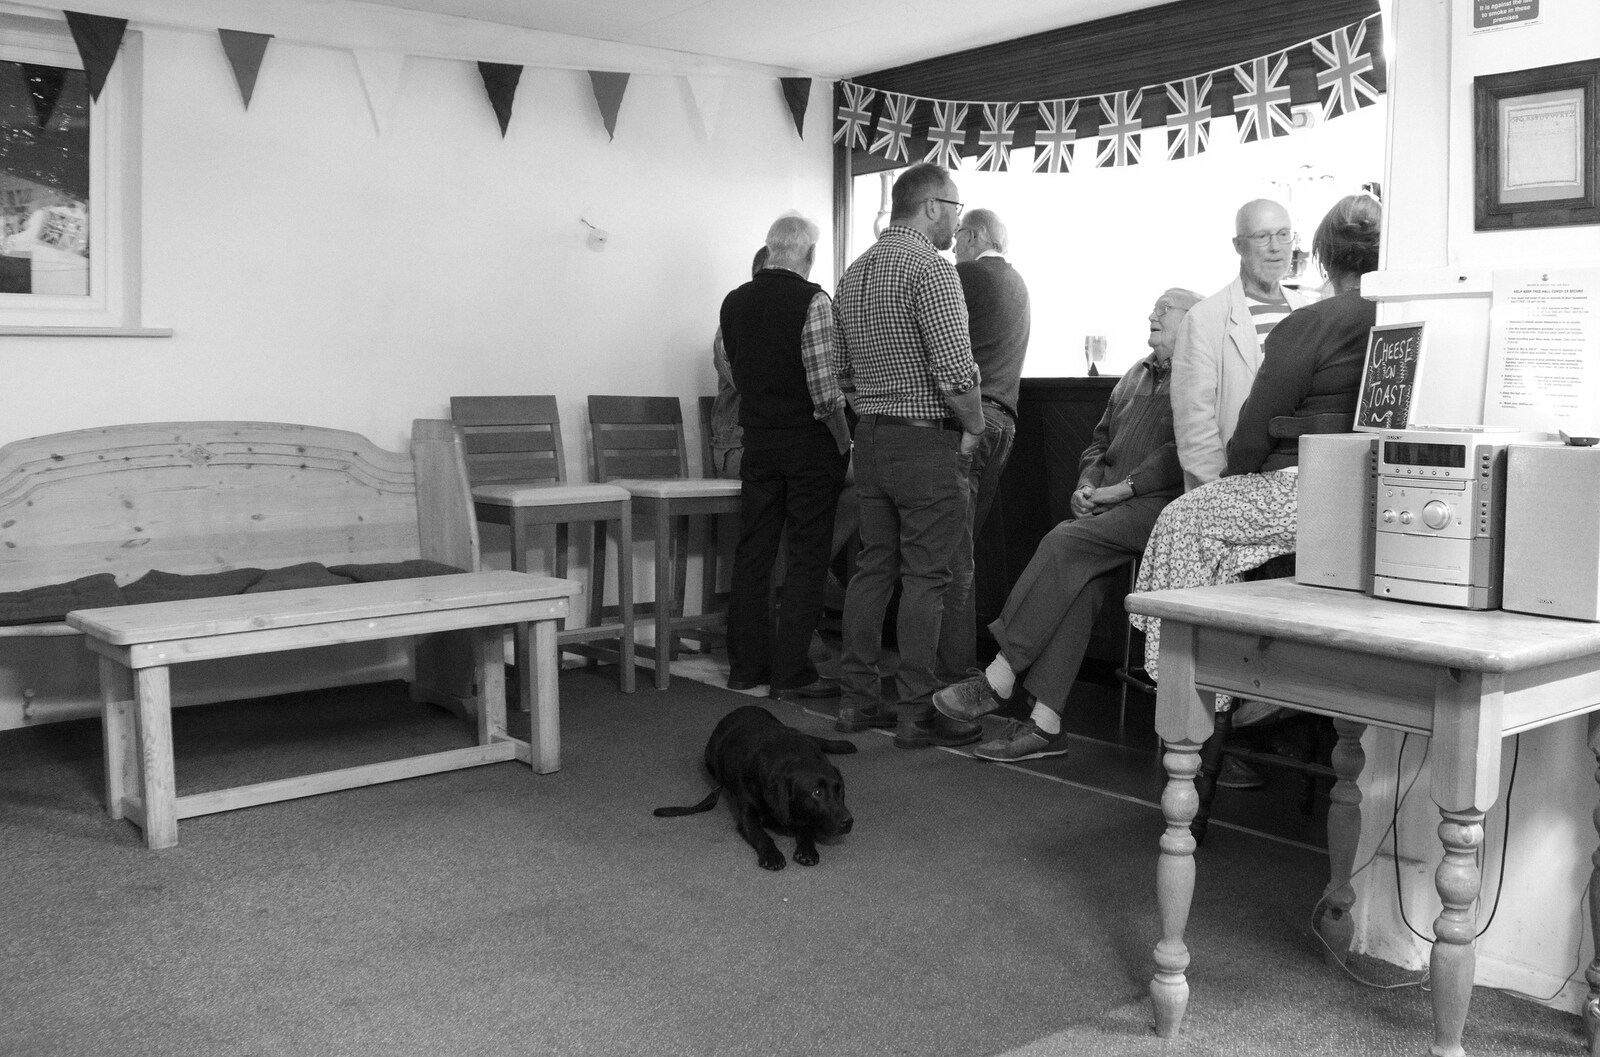 A sad-looking labrador by the bar from The Gislingham Silver Band at Barningham, Suffolk - 3rd June 2022